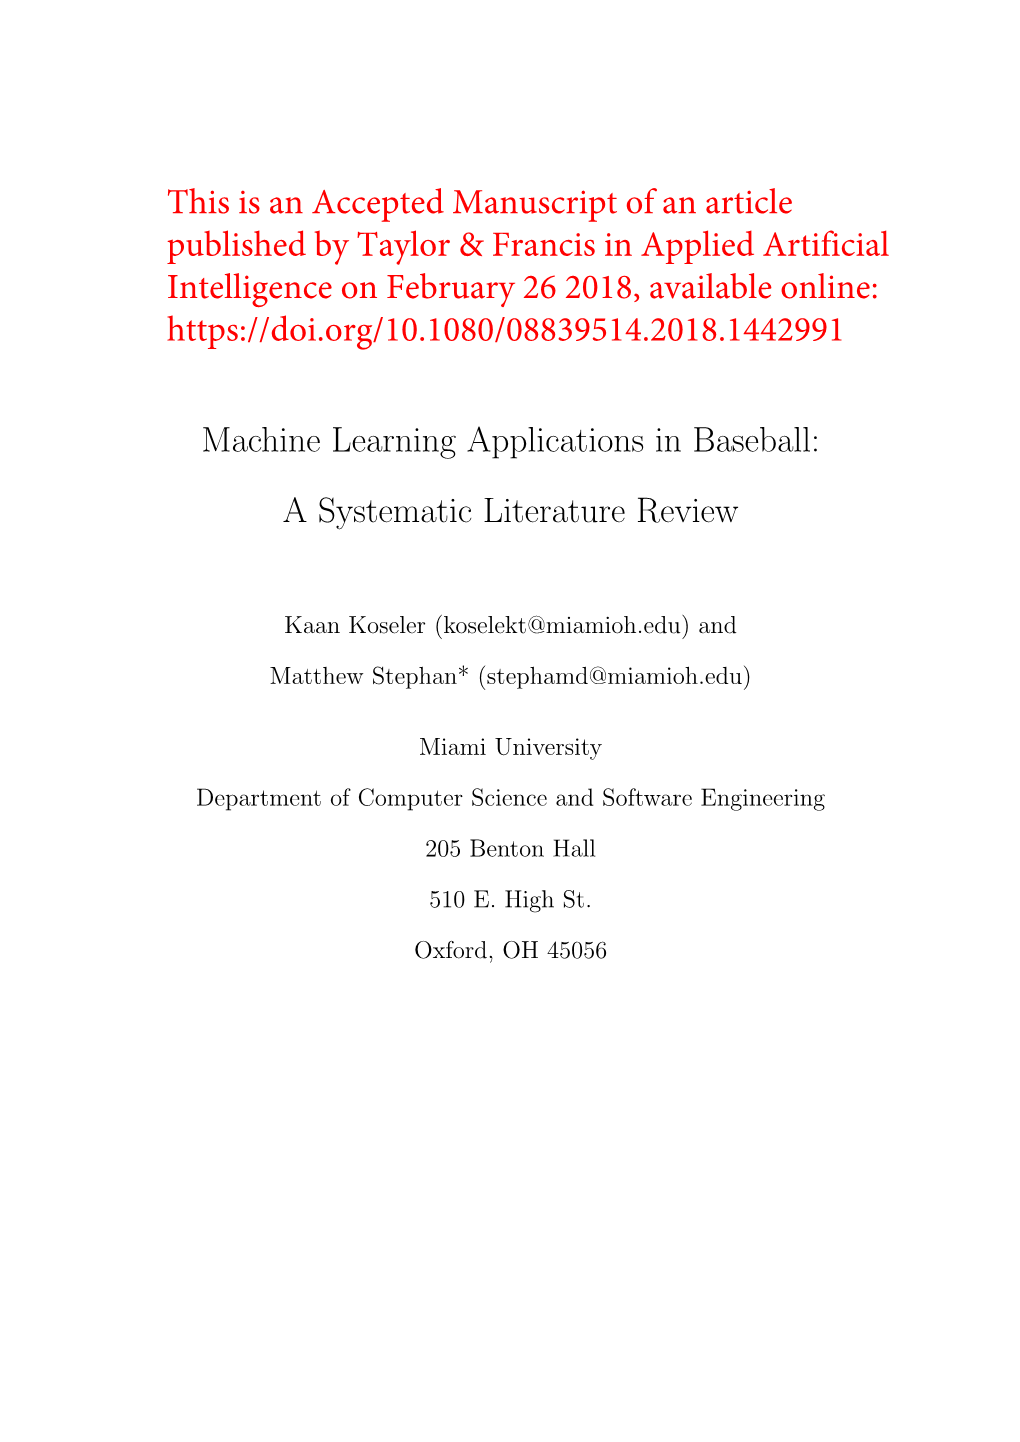 Machine Learning Applications in Baseball: a Systematic Literature Review